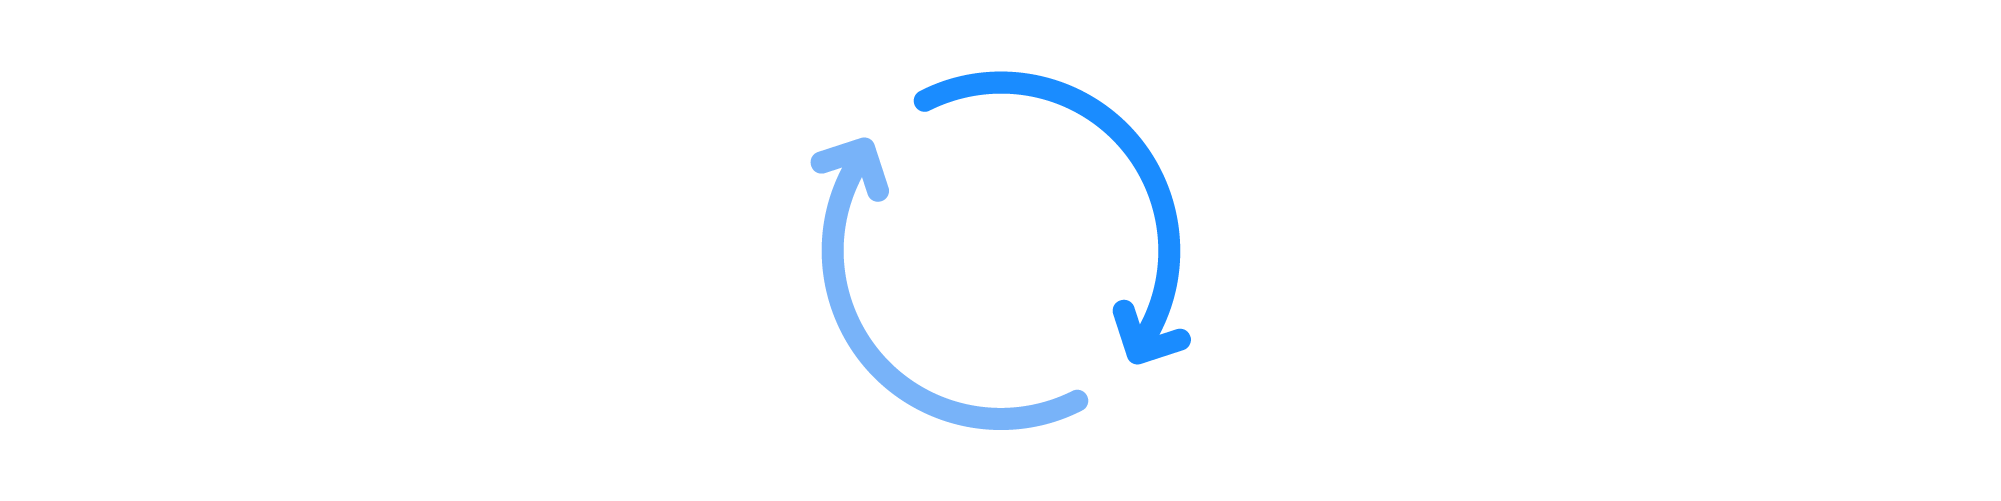 Illustrated icon of a cycle, loop